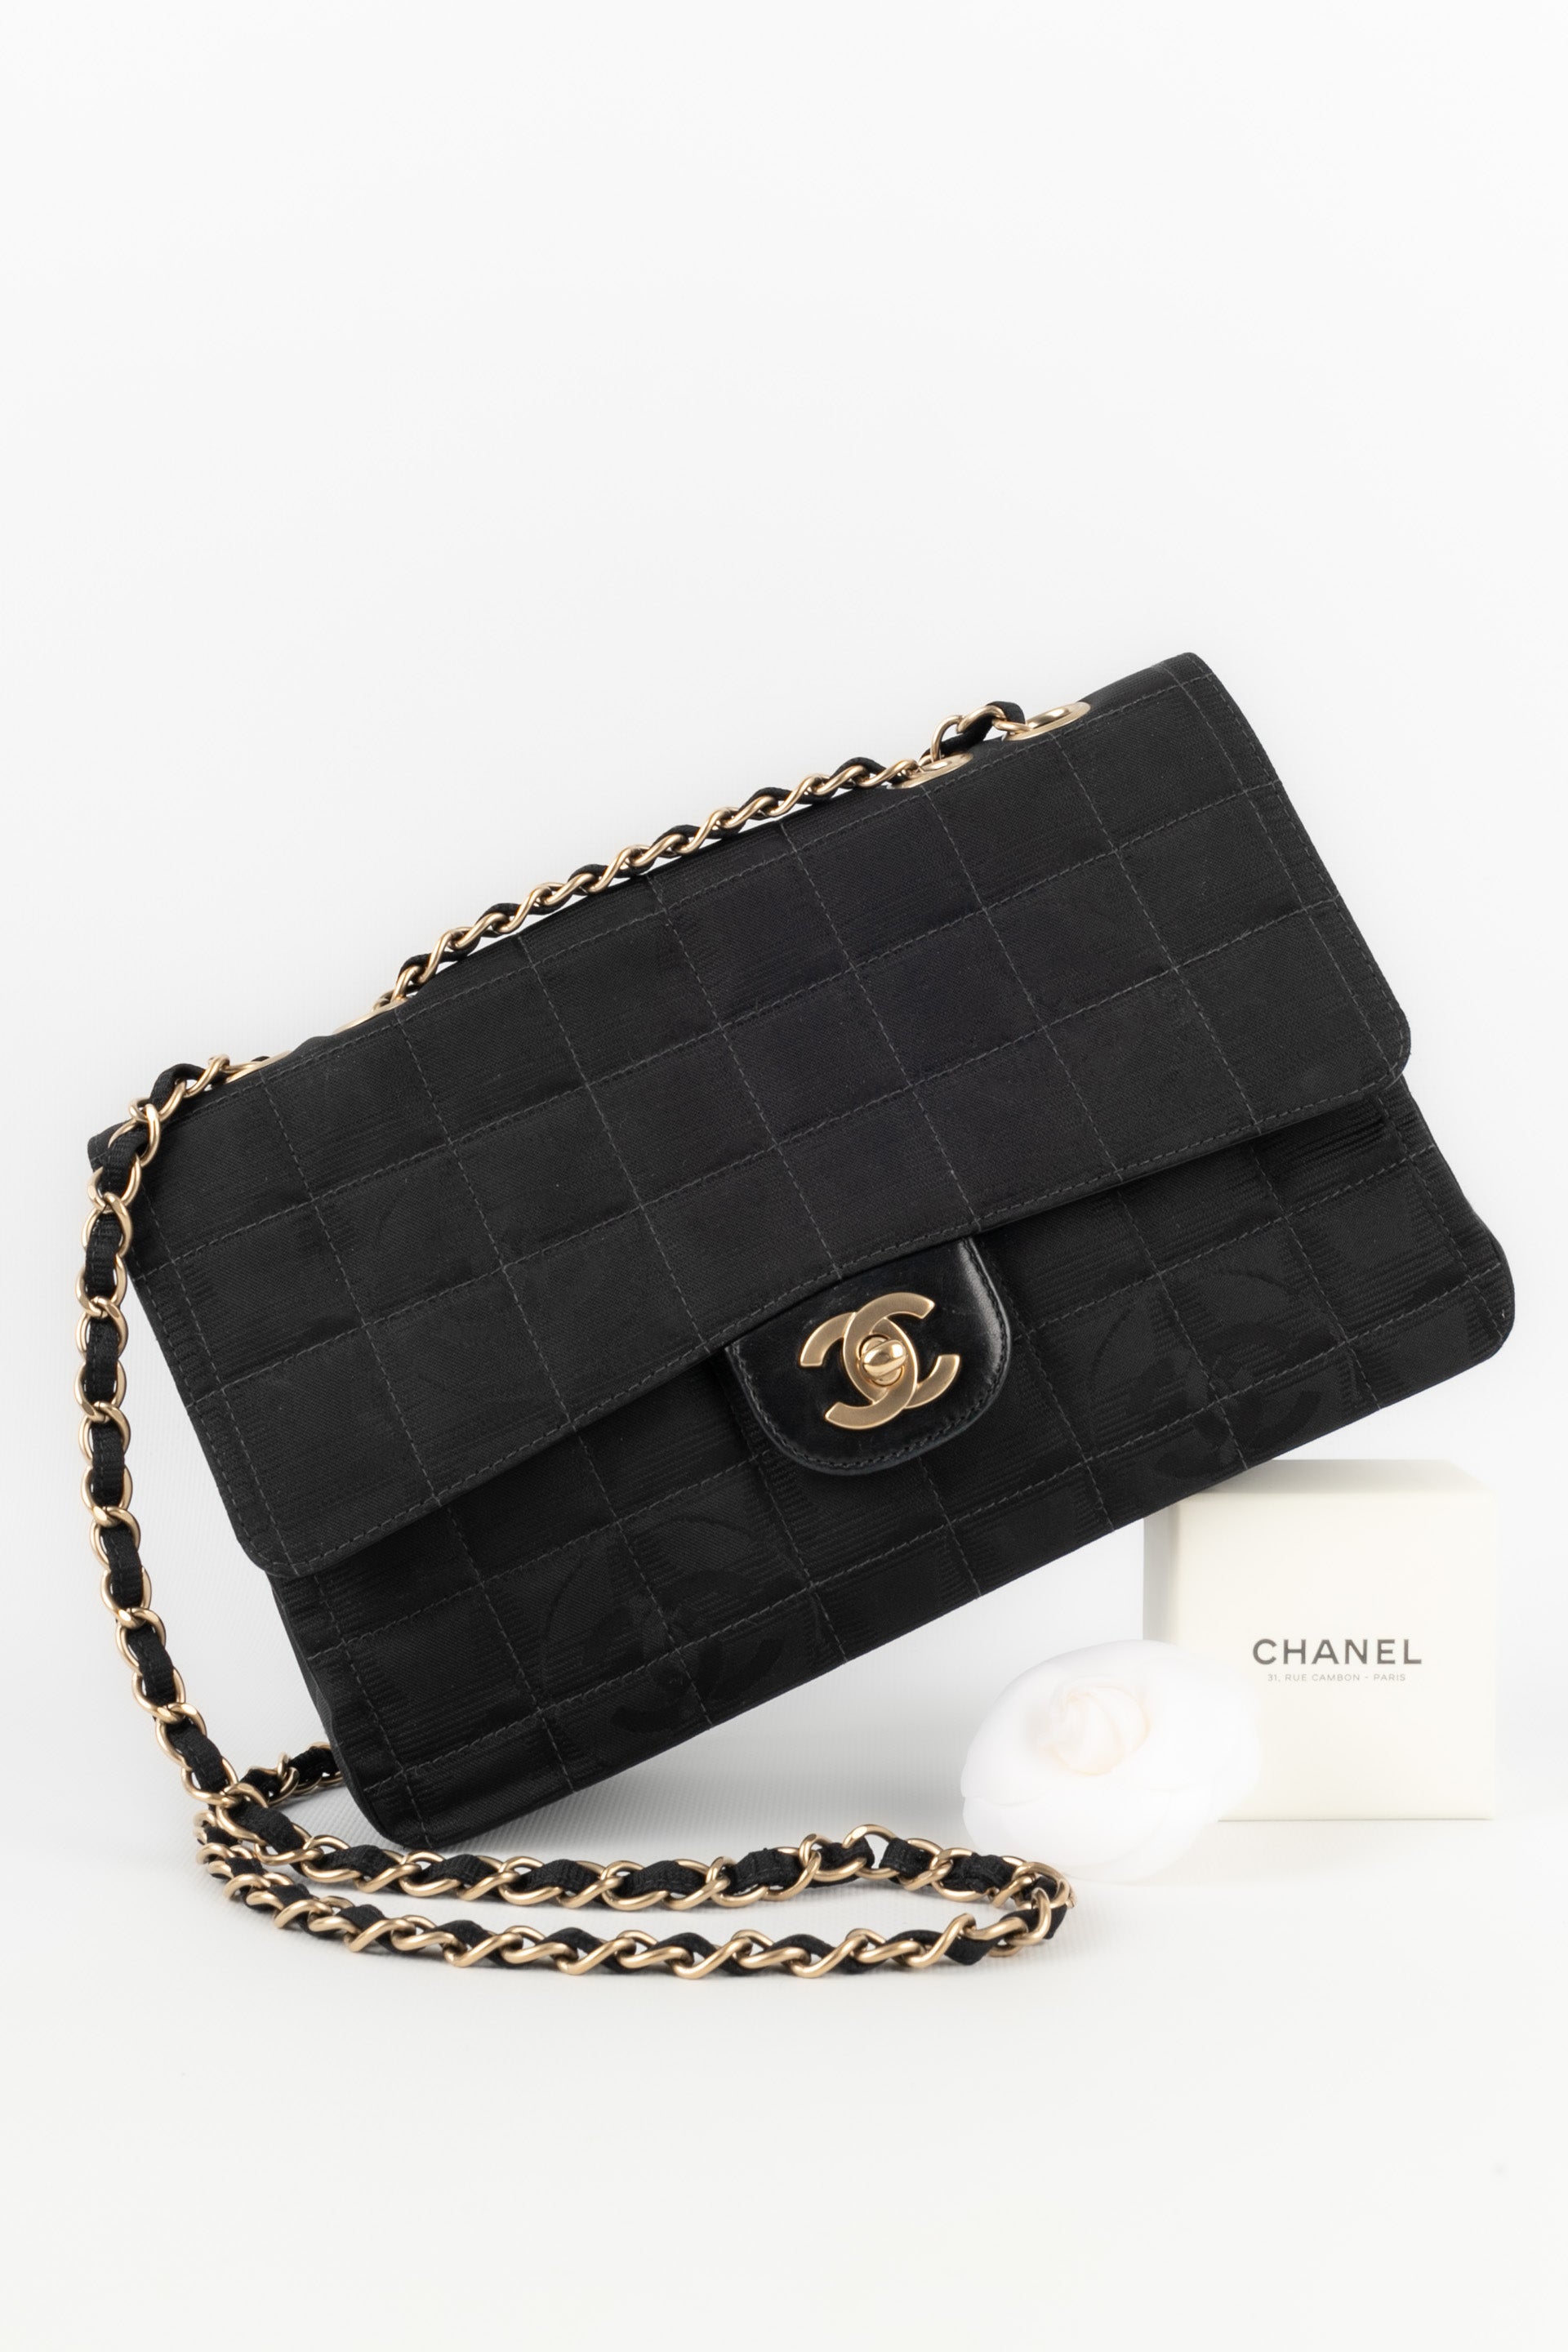 CHANEL, Bags, Vintage Chanel Tote Bag S50